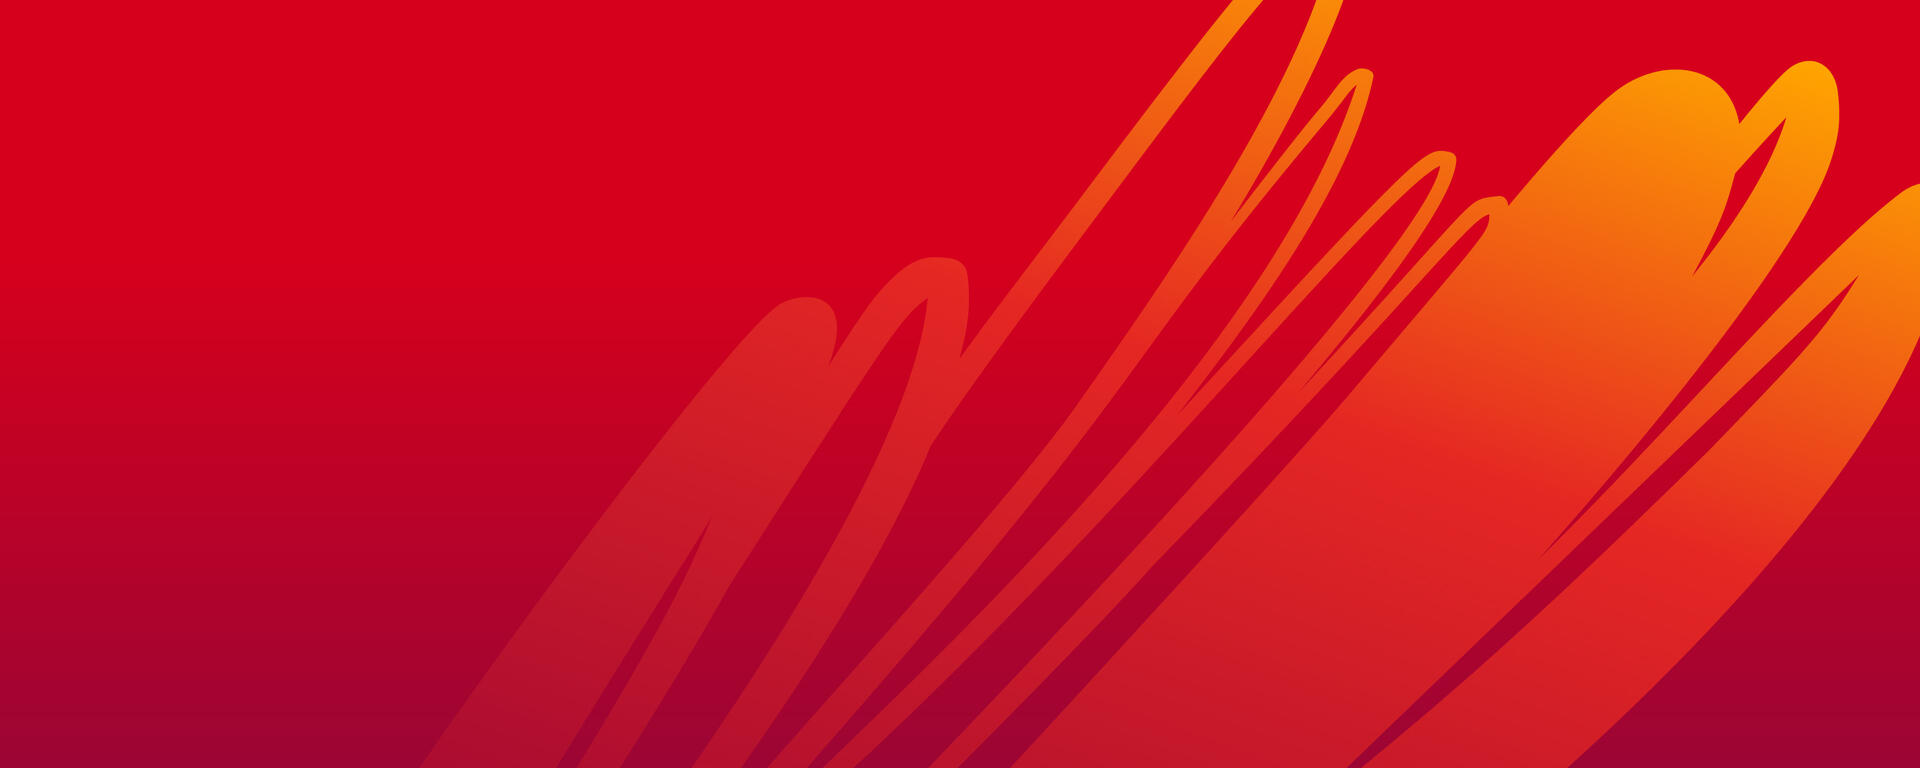 Red background with orange squiggle on top.